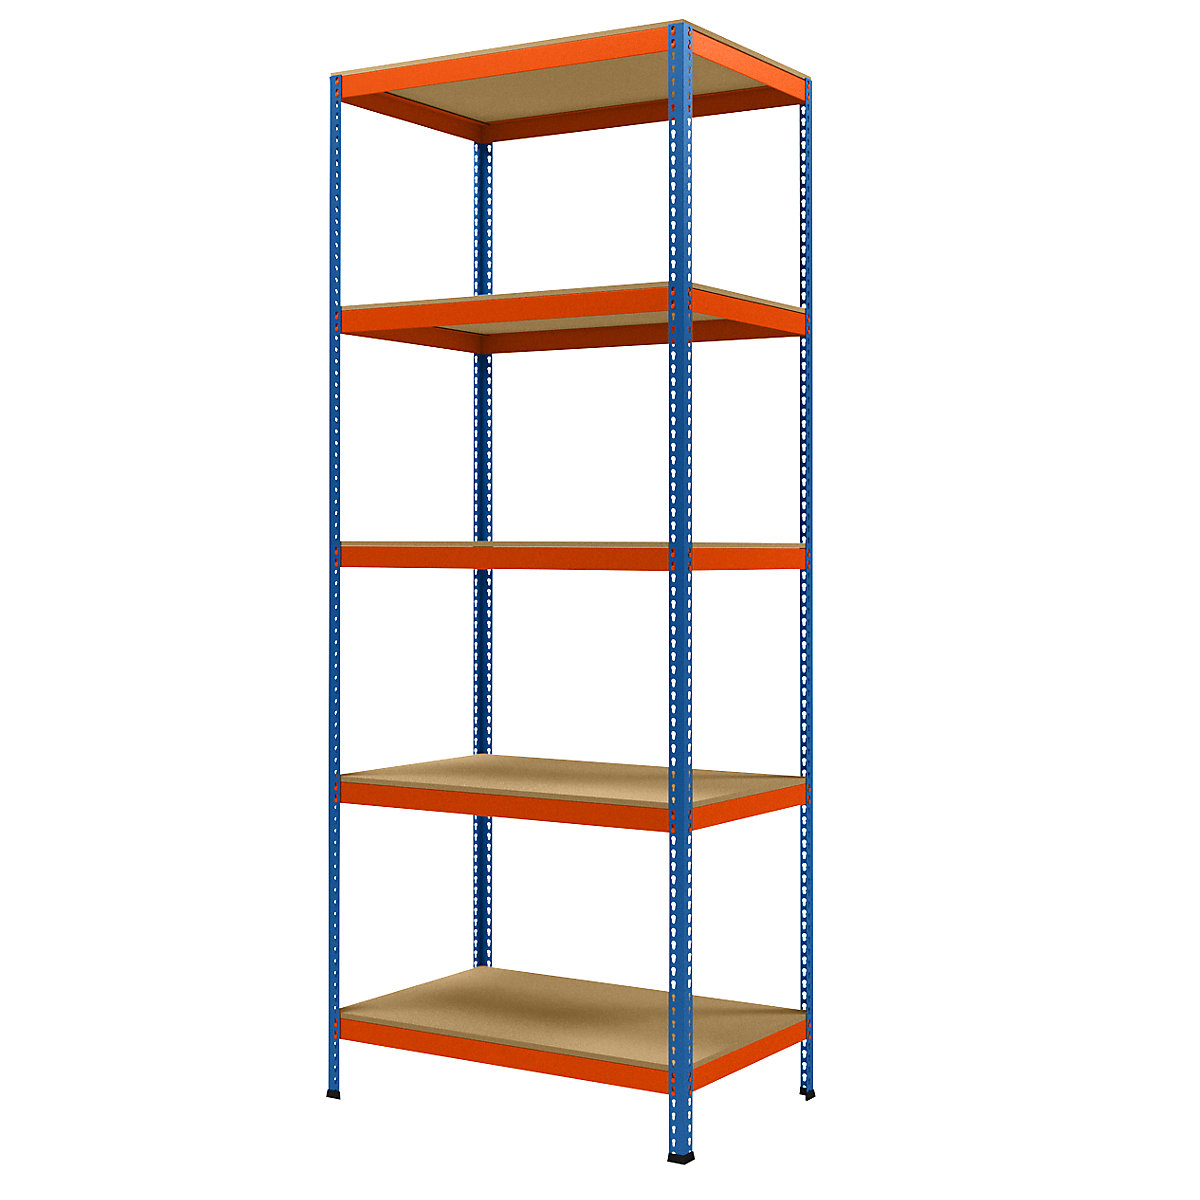 Wide span heavy duty shelving, height 3048 mm, overall depth 773 mm, width 1231 mm